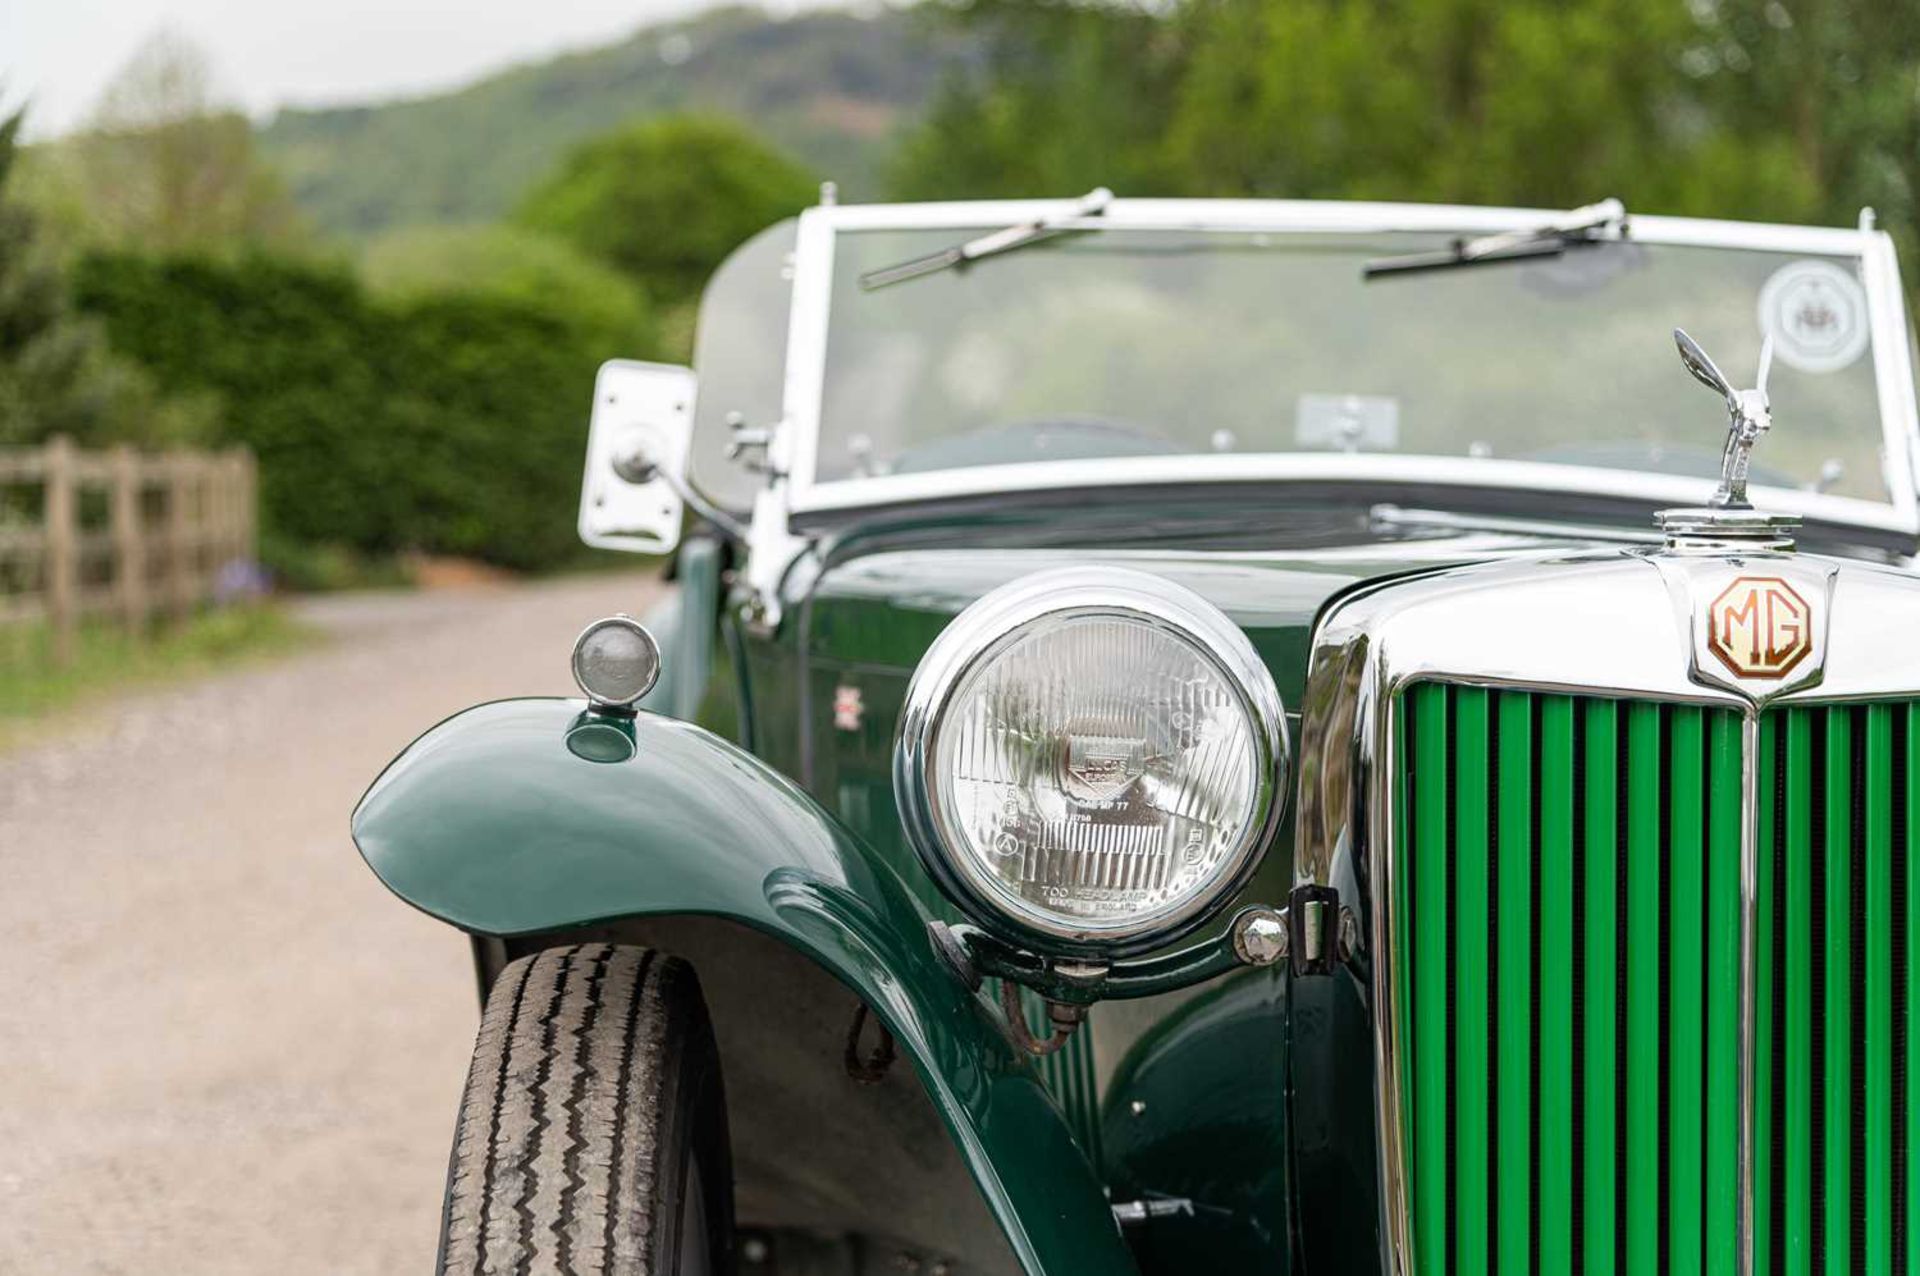 1947 MG TC Midget  Fully restored, right-hand-drive UK home market example - Image 30 of 76